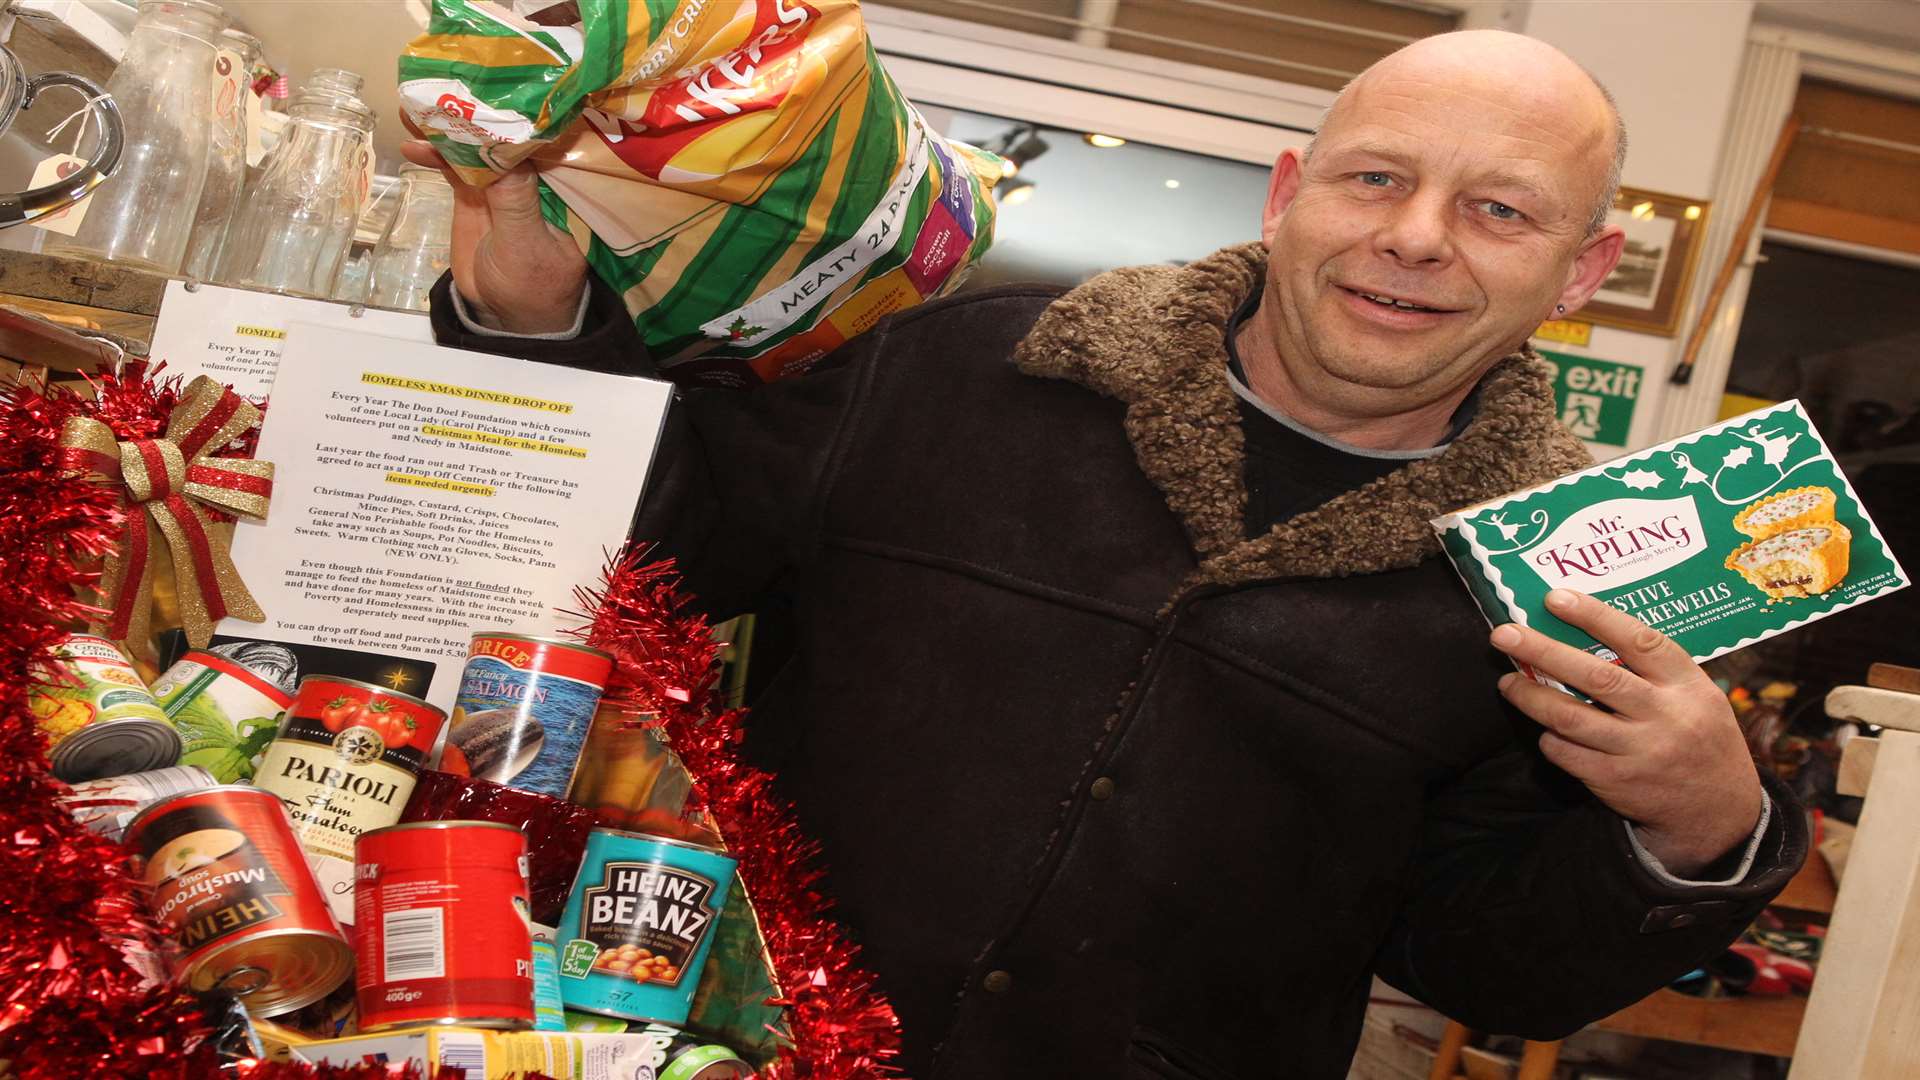 Tony Dambiec, shop employee and former homeless man at Trash or Treasure, is running a collection of food for the homeless in Maidstone. Picture: John Westhrop